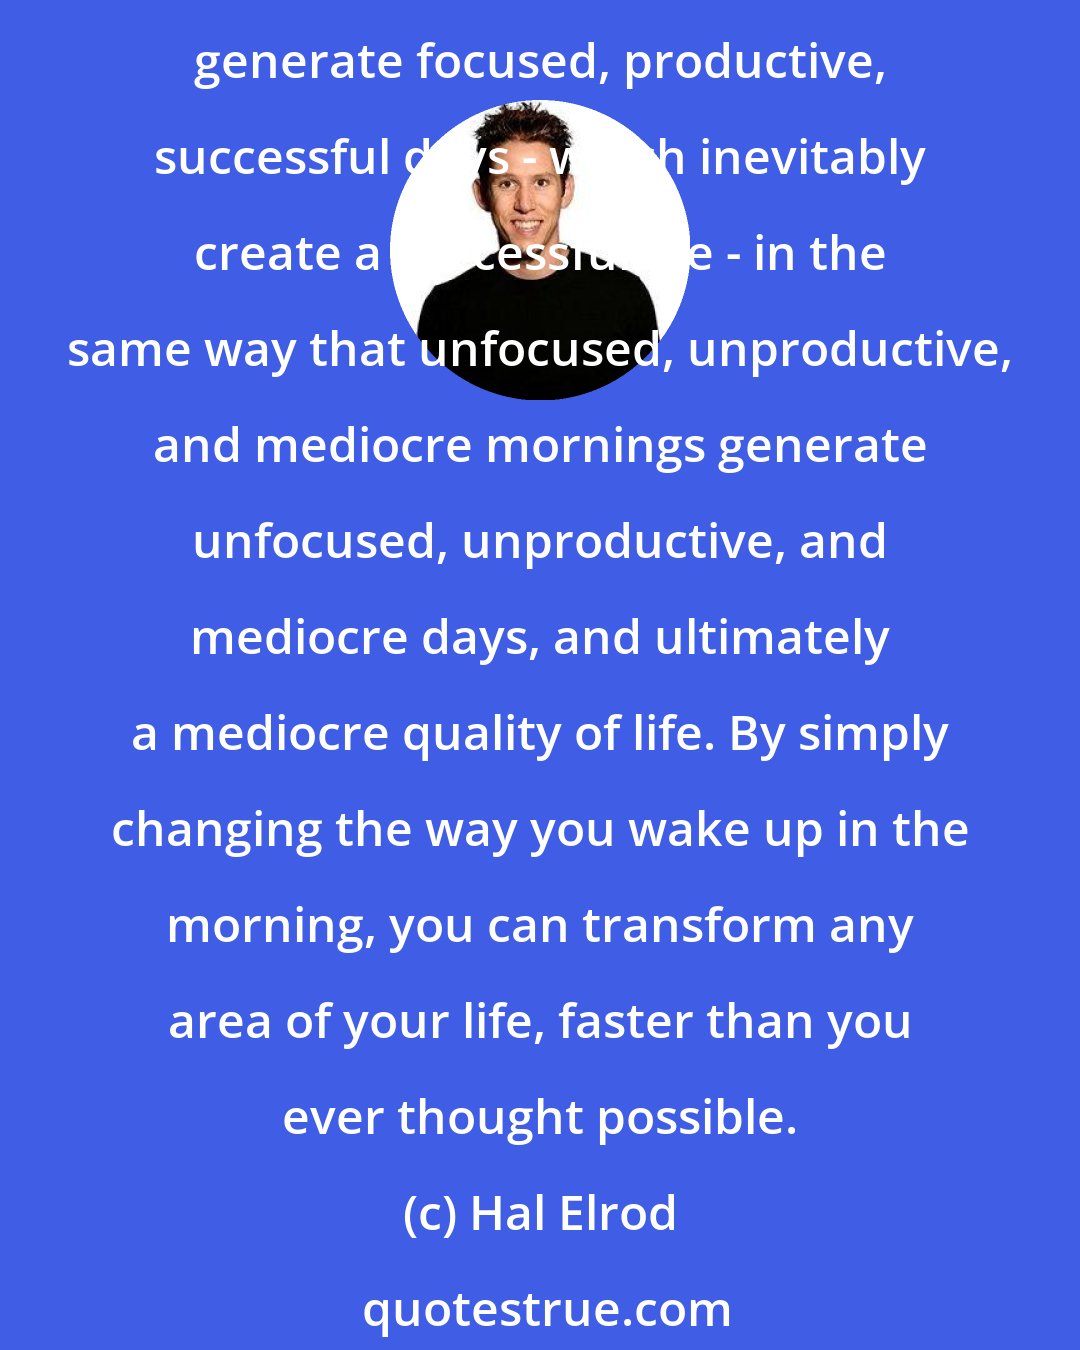 Hal Elrod: How you wake up each day and your morning routine (or lack thereof) dramatically affects your levels of success in every single area of your life. Focused, productive, successful mornings generate focused, productive, successful days - which inevitably create a successful life - in the same way that unfocused, unproductive, and mediocre mornings generate unfocused, unproductive, and mediocre days, and ultimately a mediocre quality of life. By simply changing the way you wake up in the morning, you can transform any area of your life, faster than you ever thought possible.